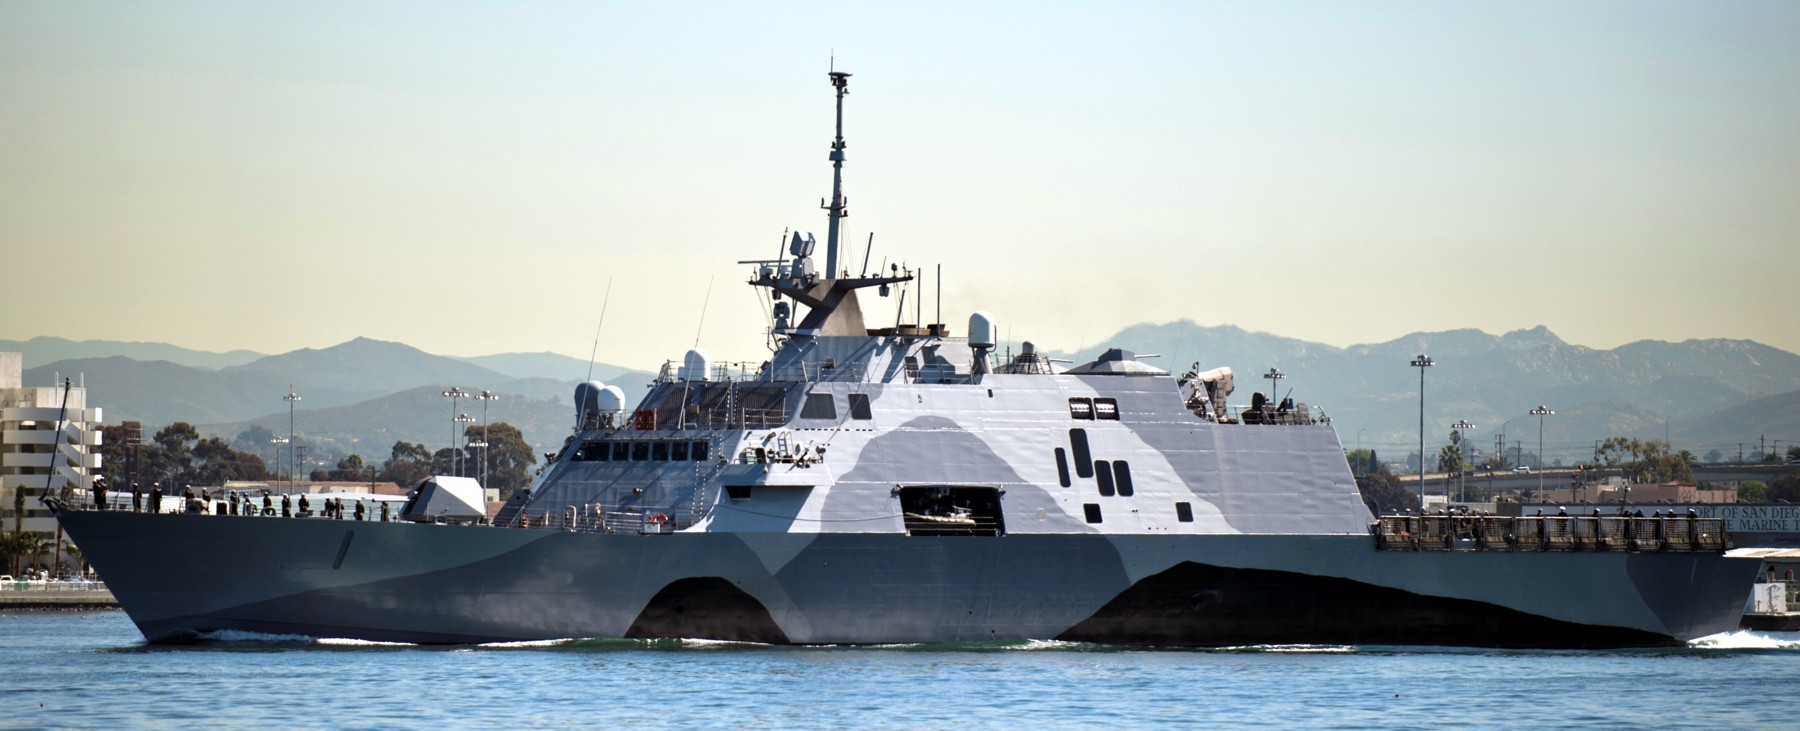 lcs-1 uss freedom class littoral combat ship us navy 46